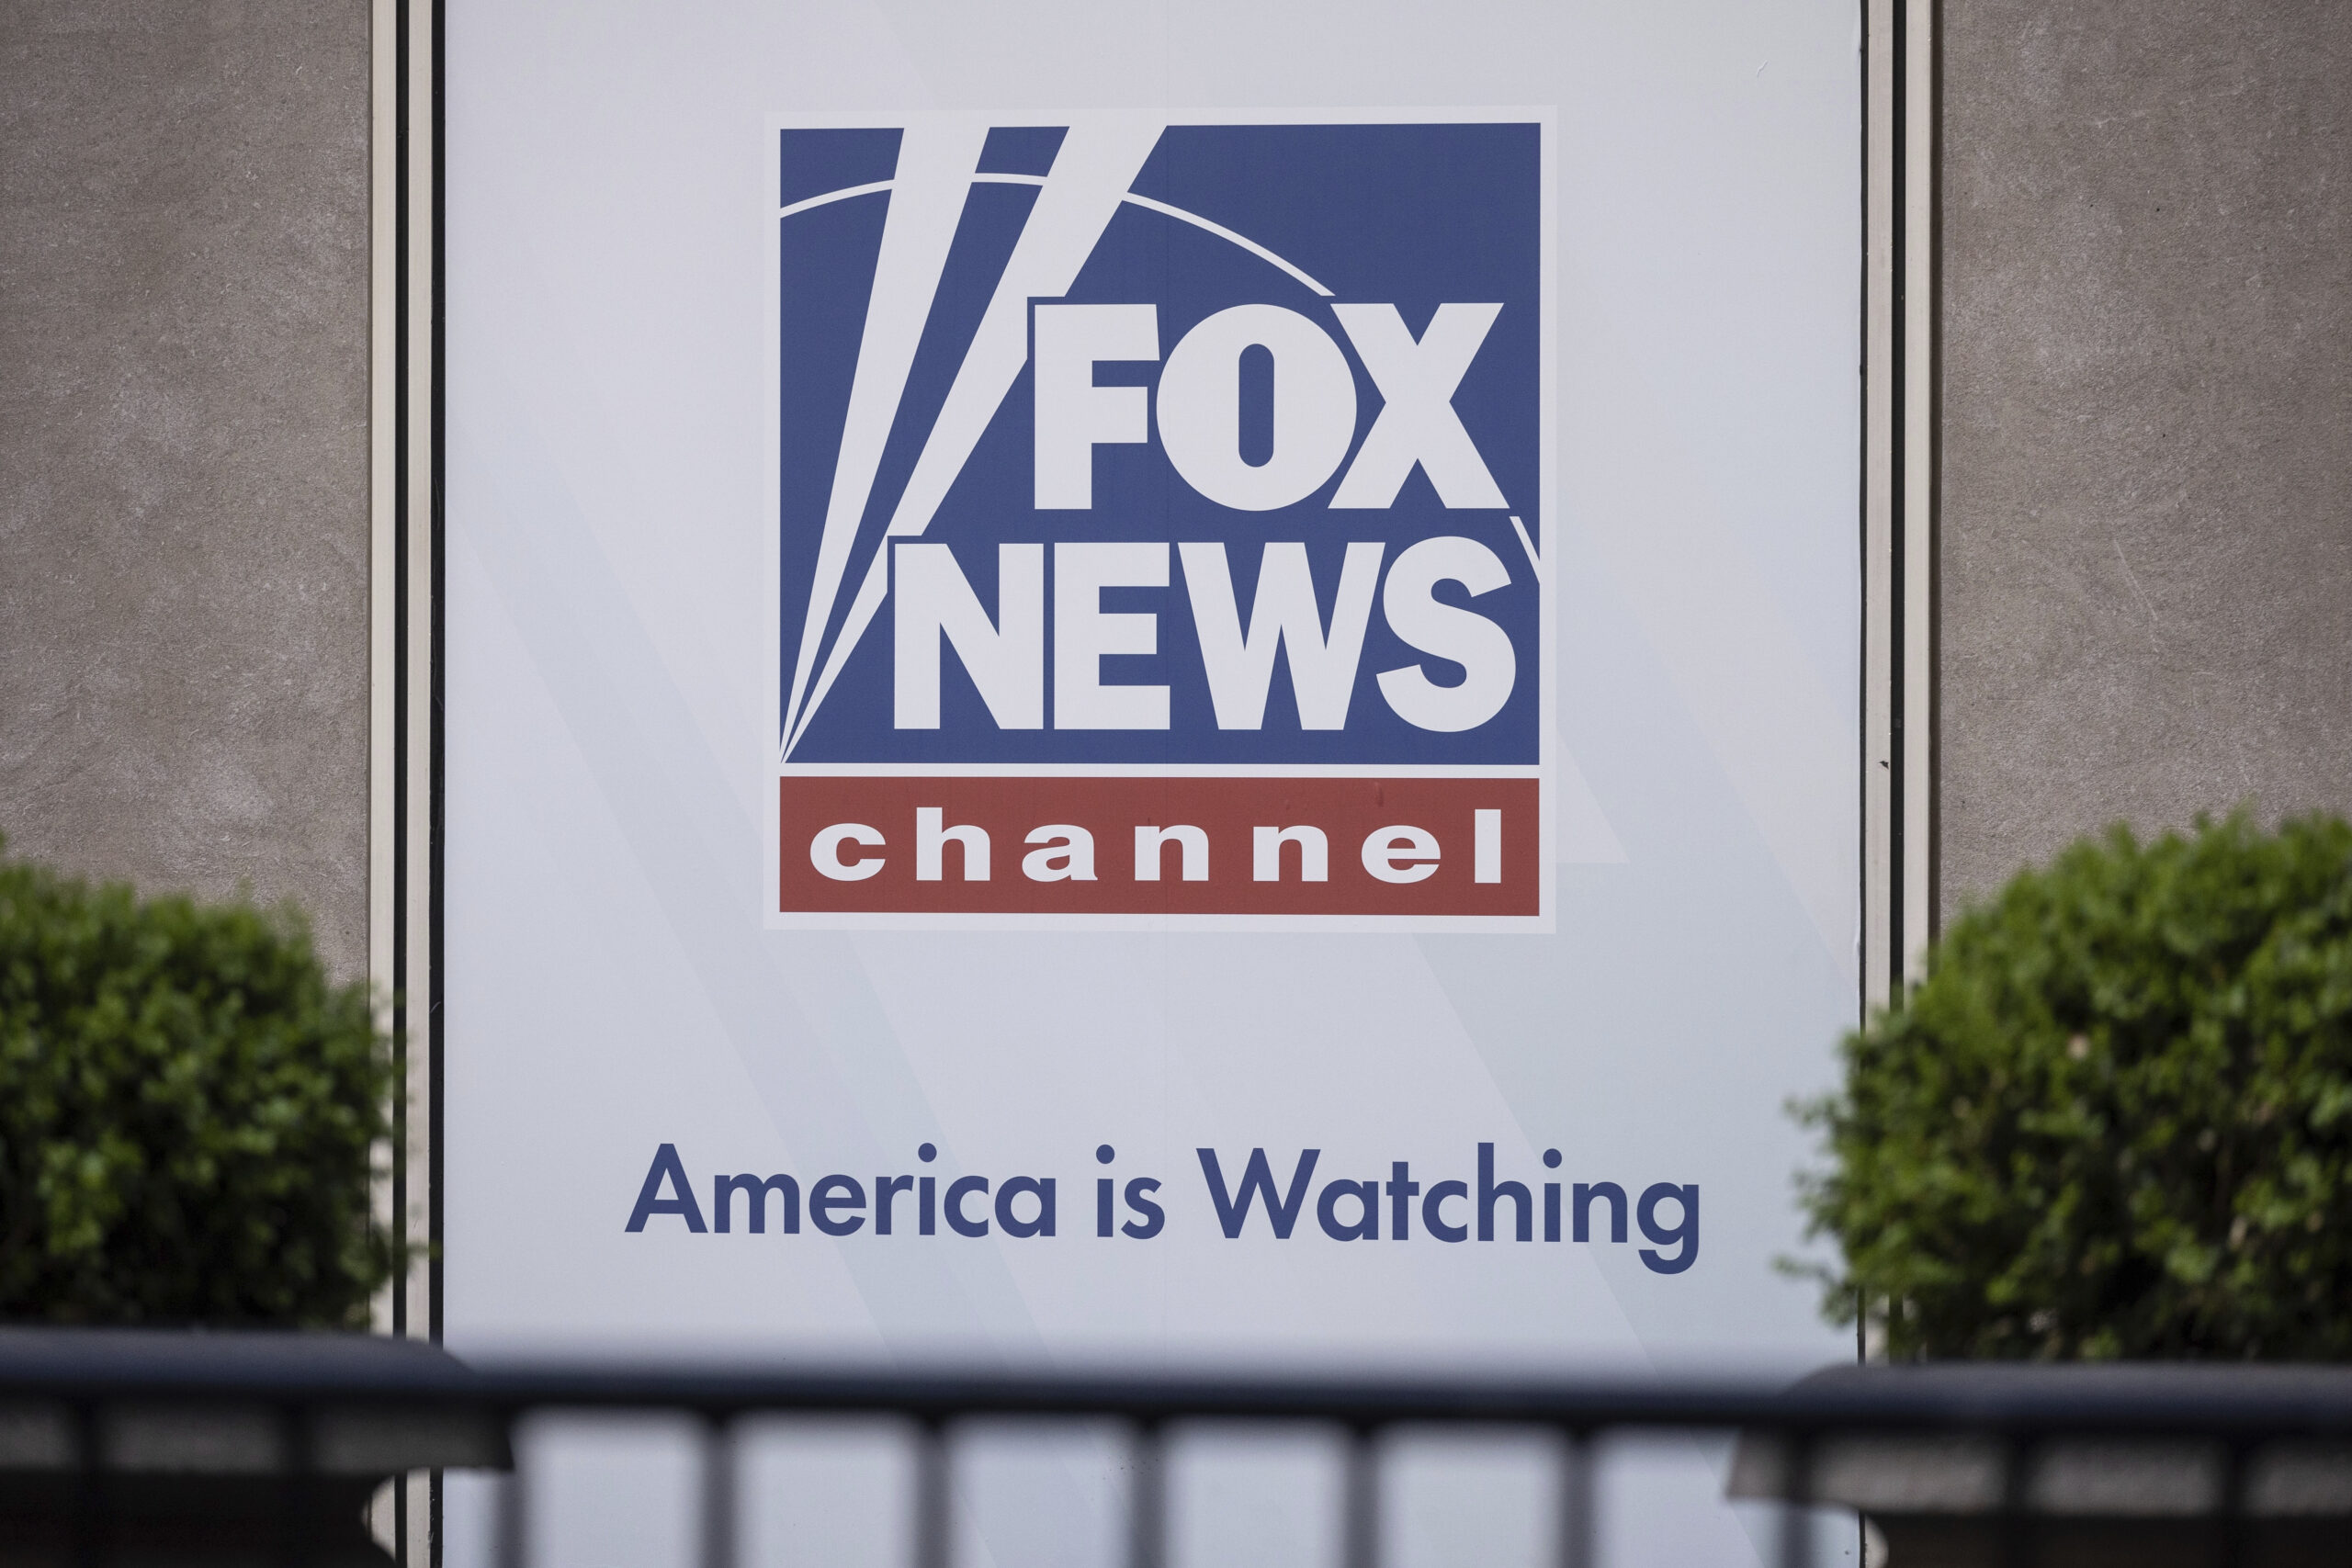 Former Fox Executives Apologize For Helping Birth ‘Bile-Filled Network’ That ‘Has Had Many Negative Impacts On Our Society’